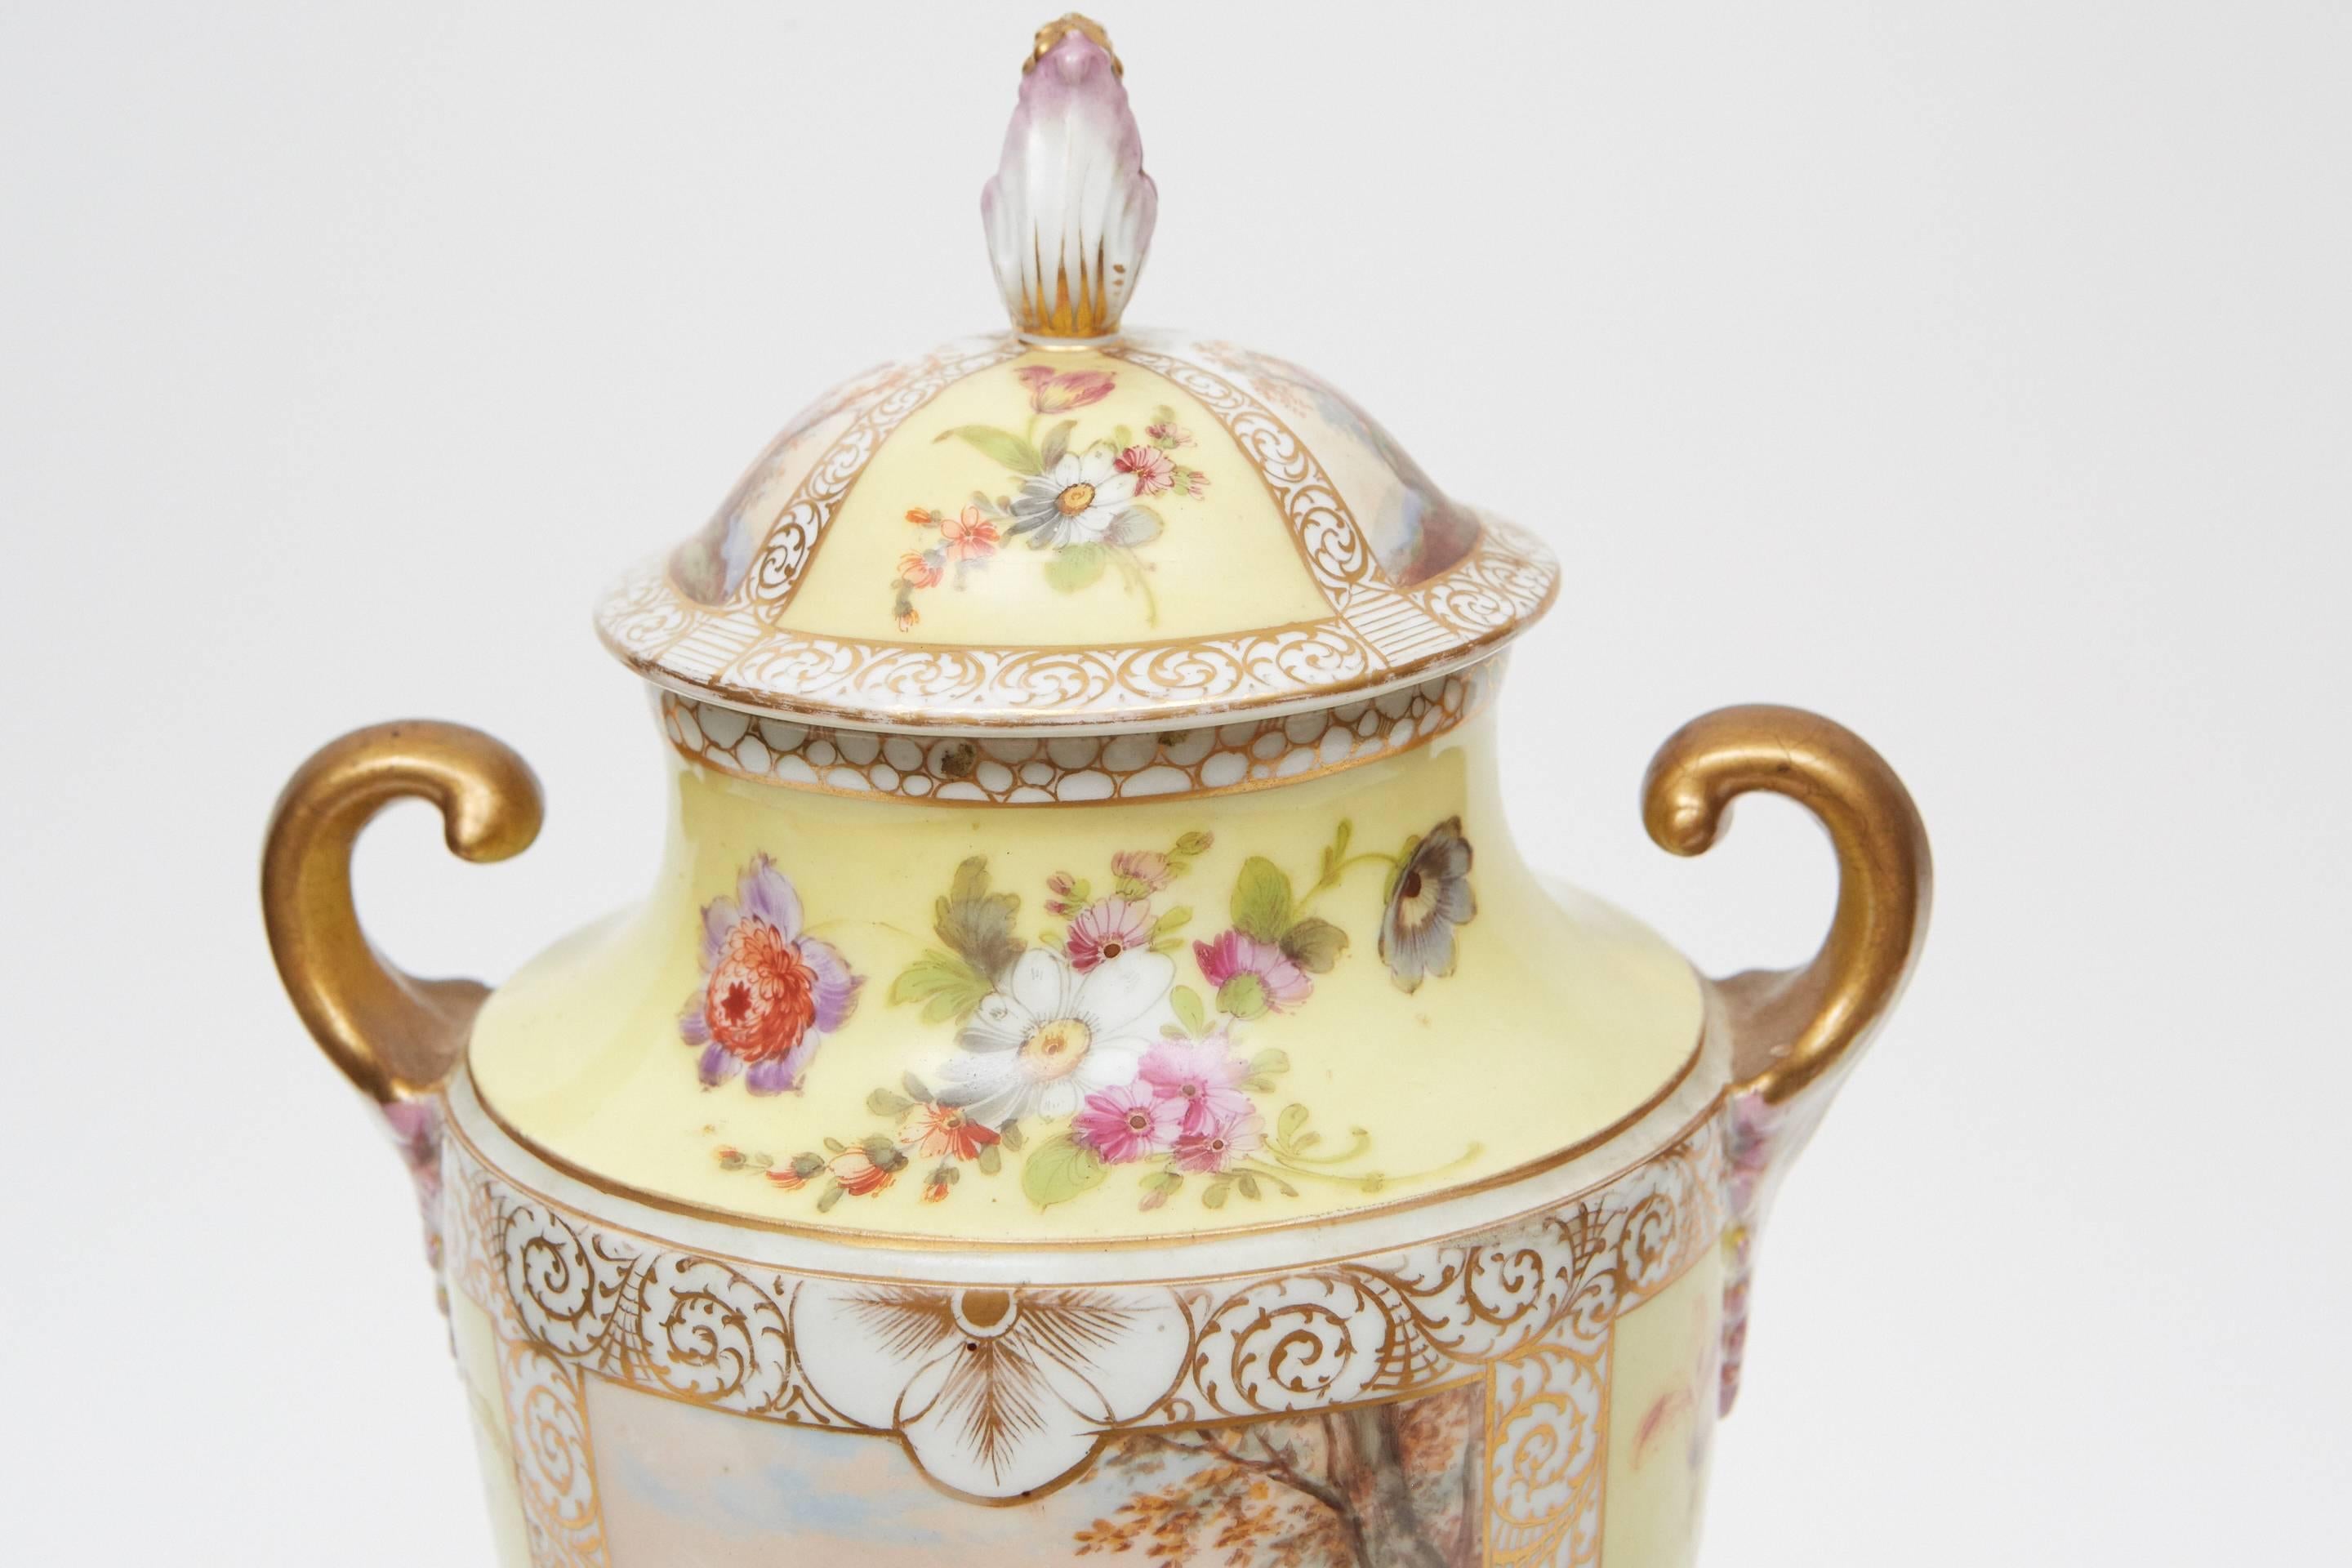 This Dresden hand-painted porcelain urn on plinth has floral and figurative elements throughout with two large scenes of couples on each side. The piece has gold painted decorative boarders and and two gold and rose hand-painted handles. The maker's